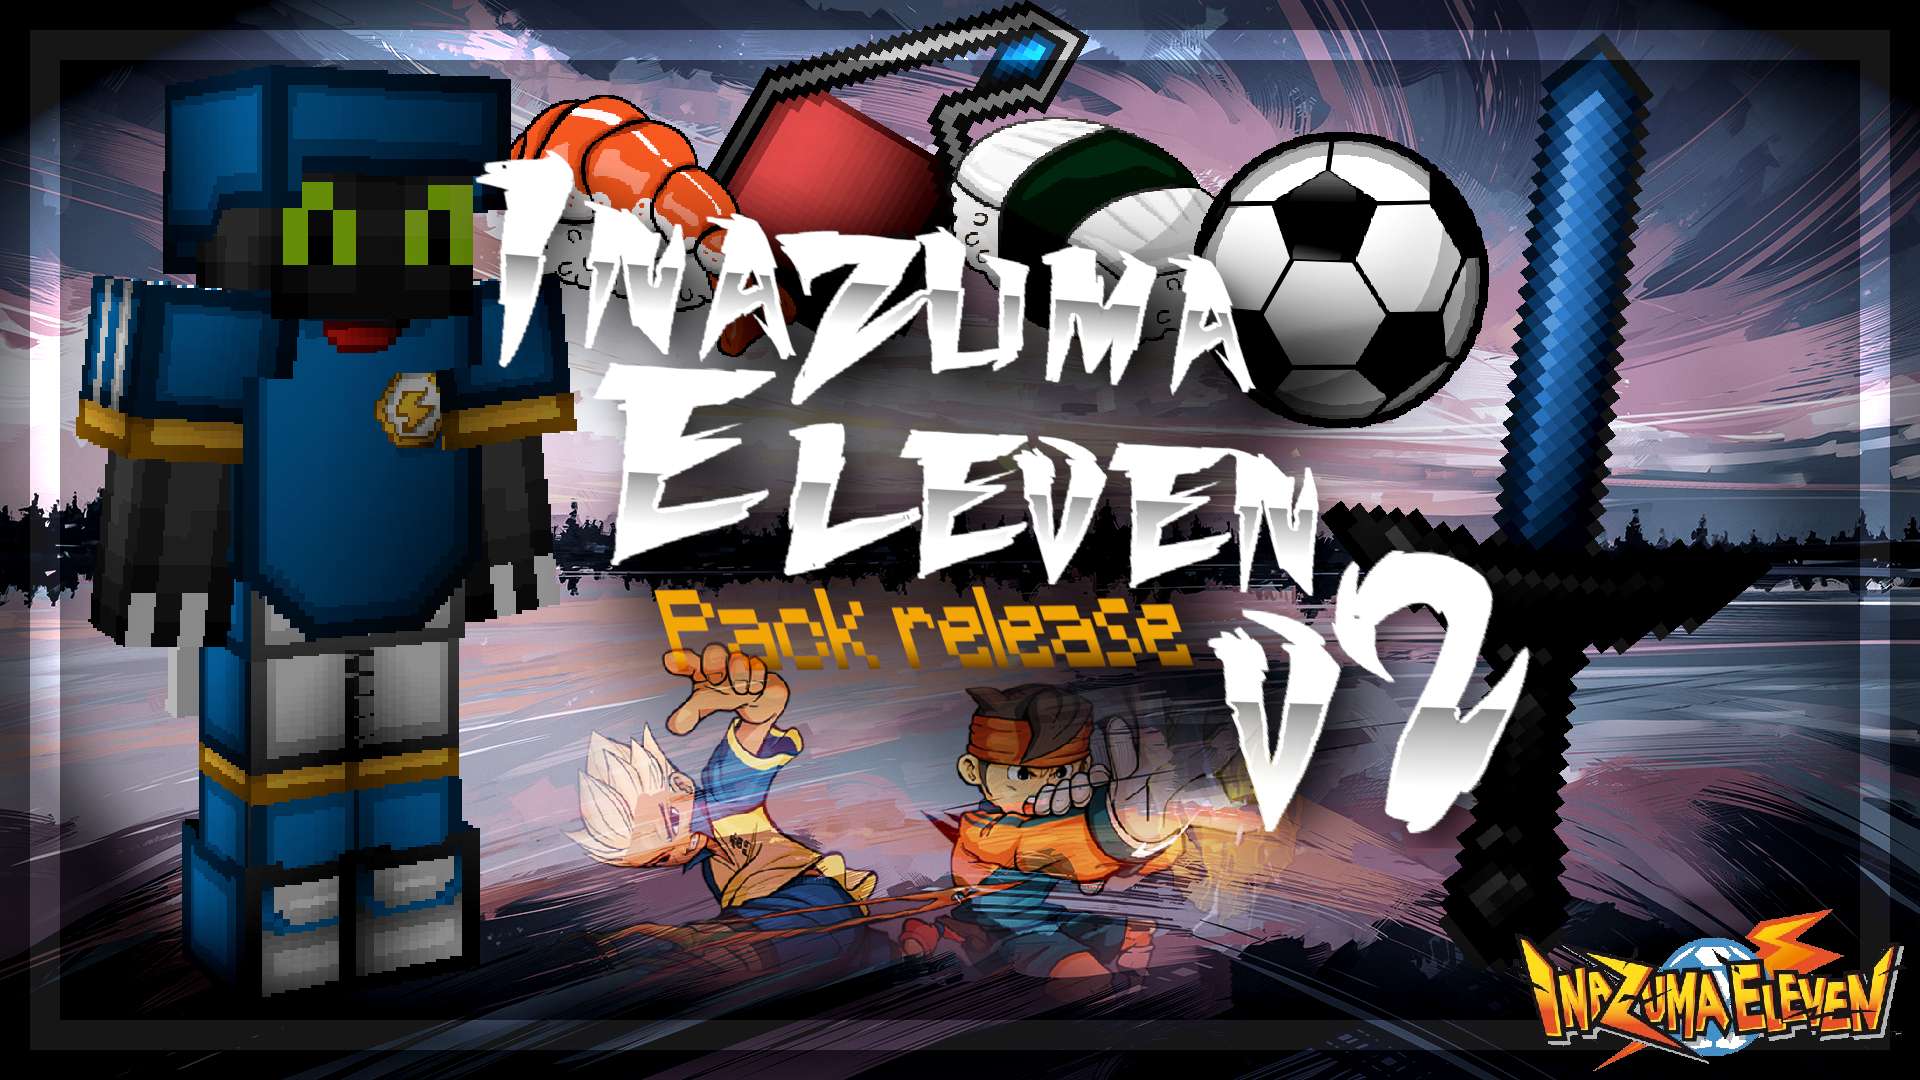 Gallery Banner for Inazuma Eleven on PvPRP